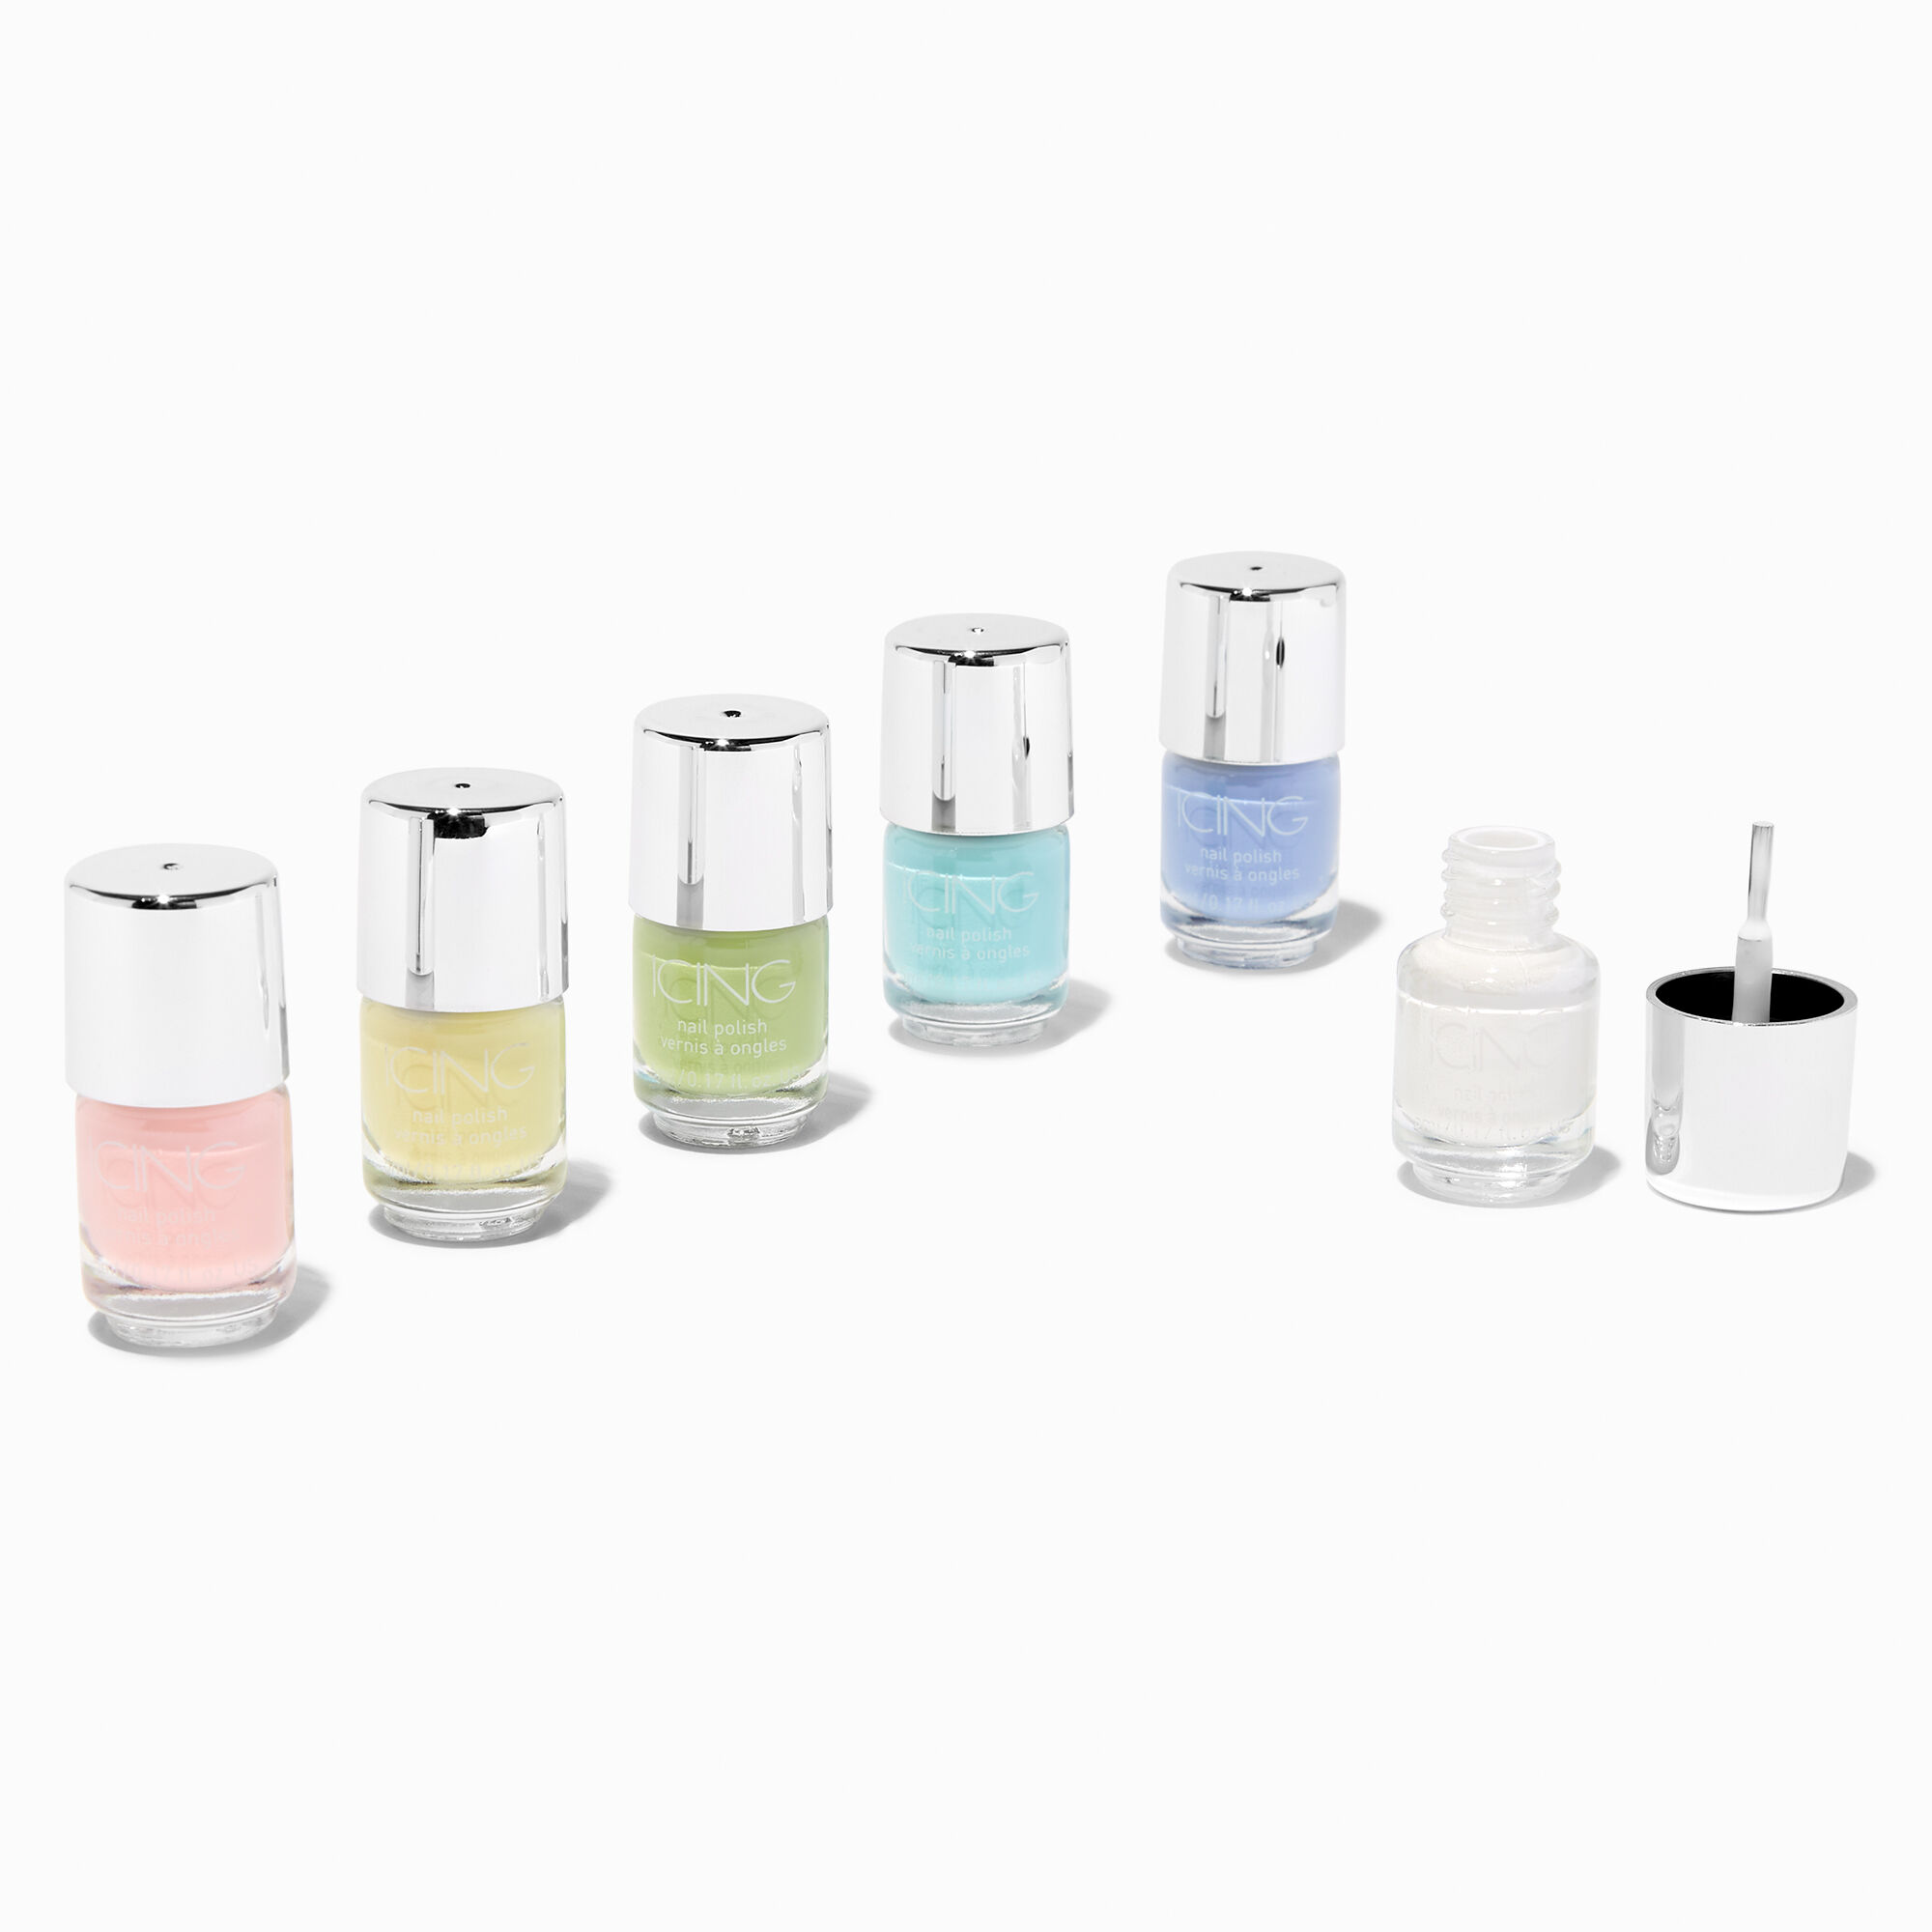 Review, Photos, Swatches, Best Nail Polish, Looks, Trends 2020, 2021: Essie,  Spring 2020 Nail Polish Collection, Best Pastel Nail Polish Shades |  BeautyStat.com